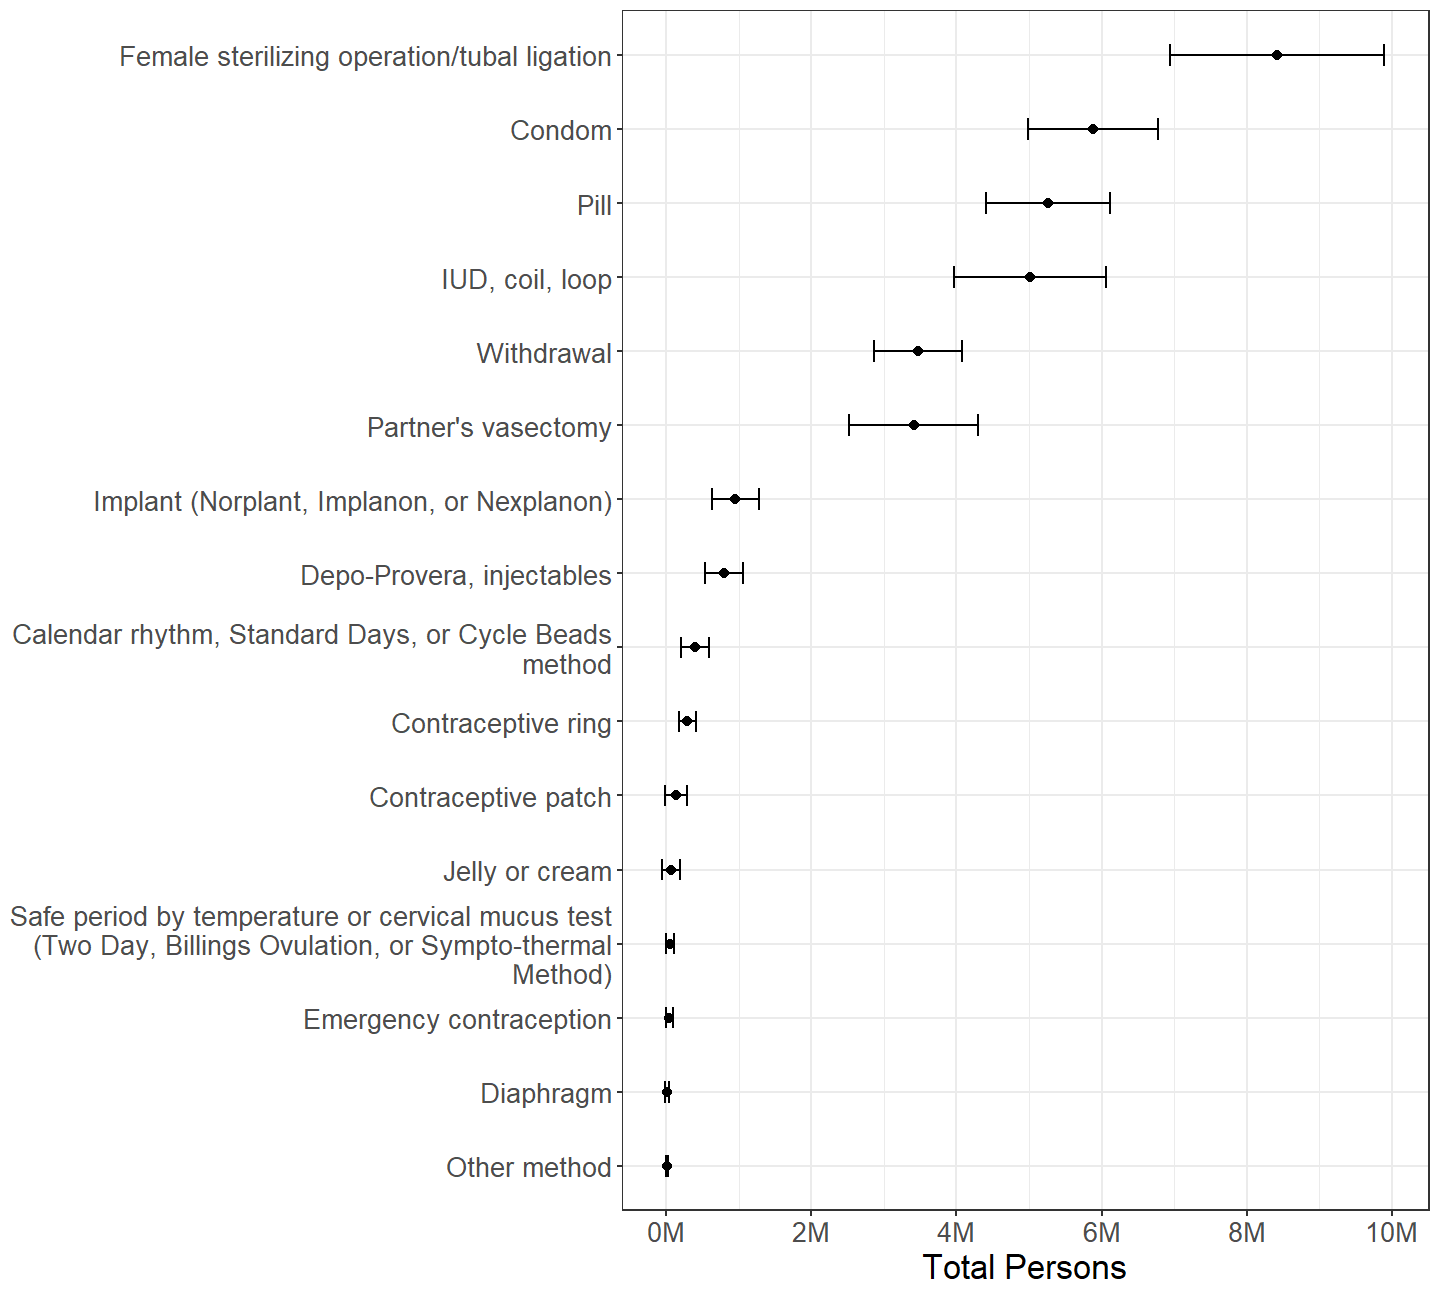 Females categorized by which contraceptive method was used during last intercourse with a male in the past 3 months, among those who used exactly one method during last intercourse.